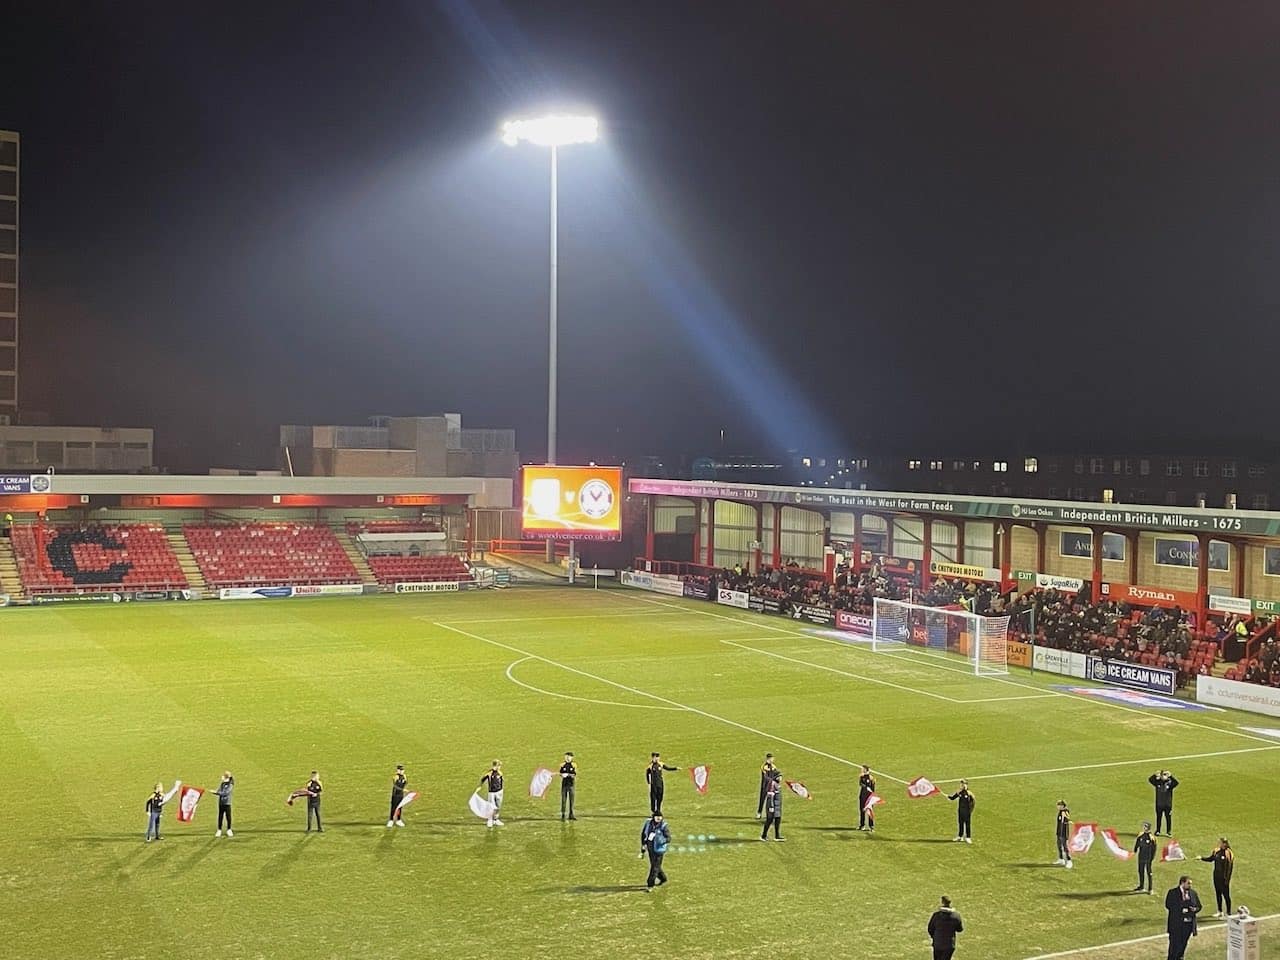 young people waving flags on a football pitch under floodlights before a game.